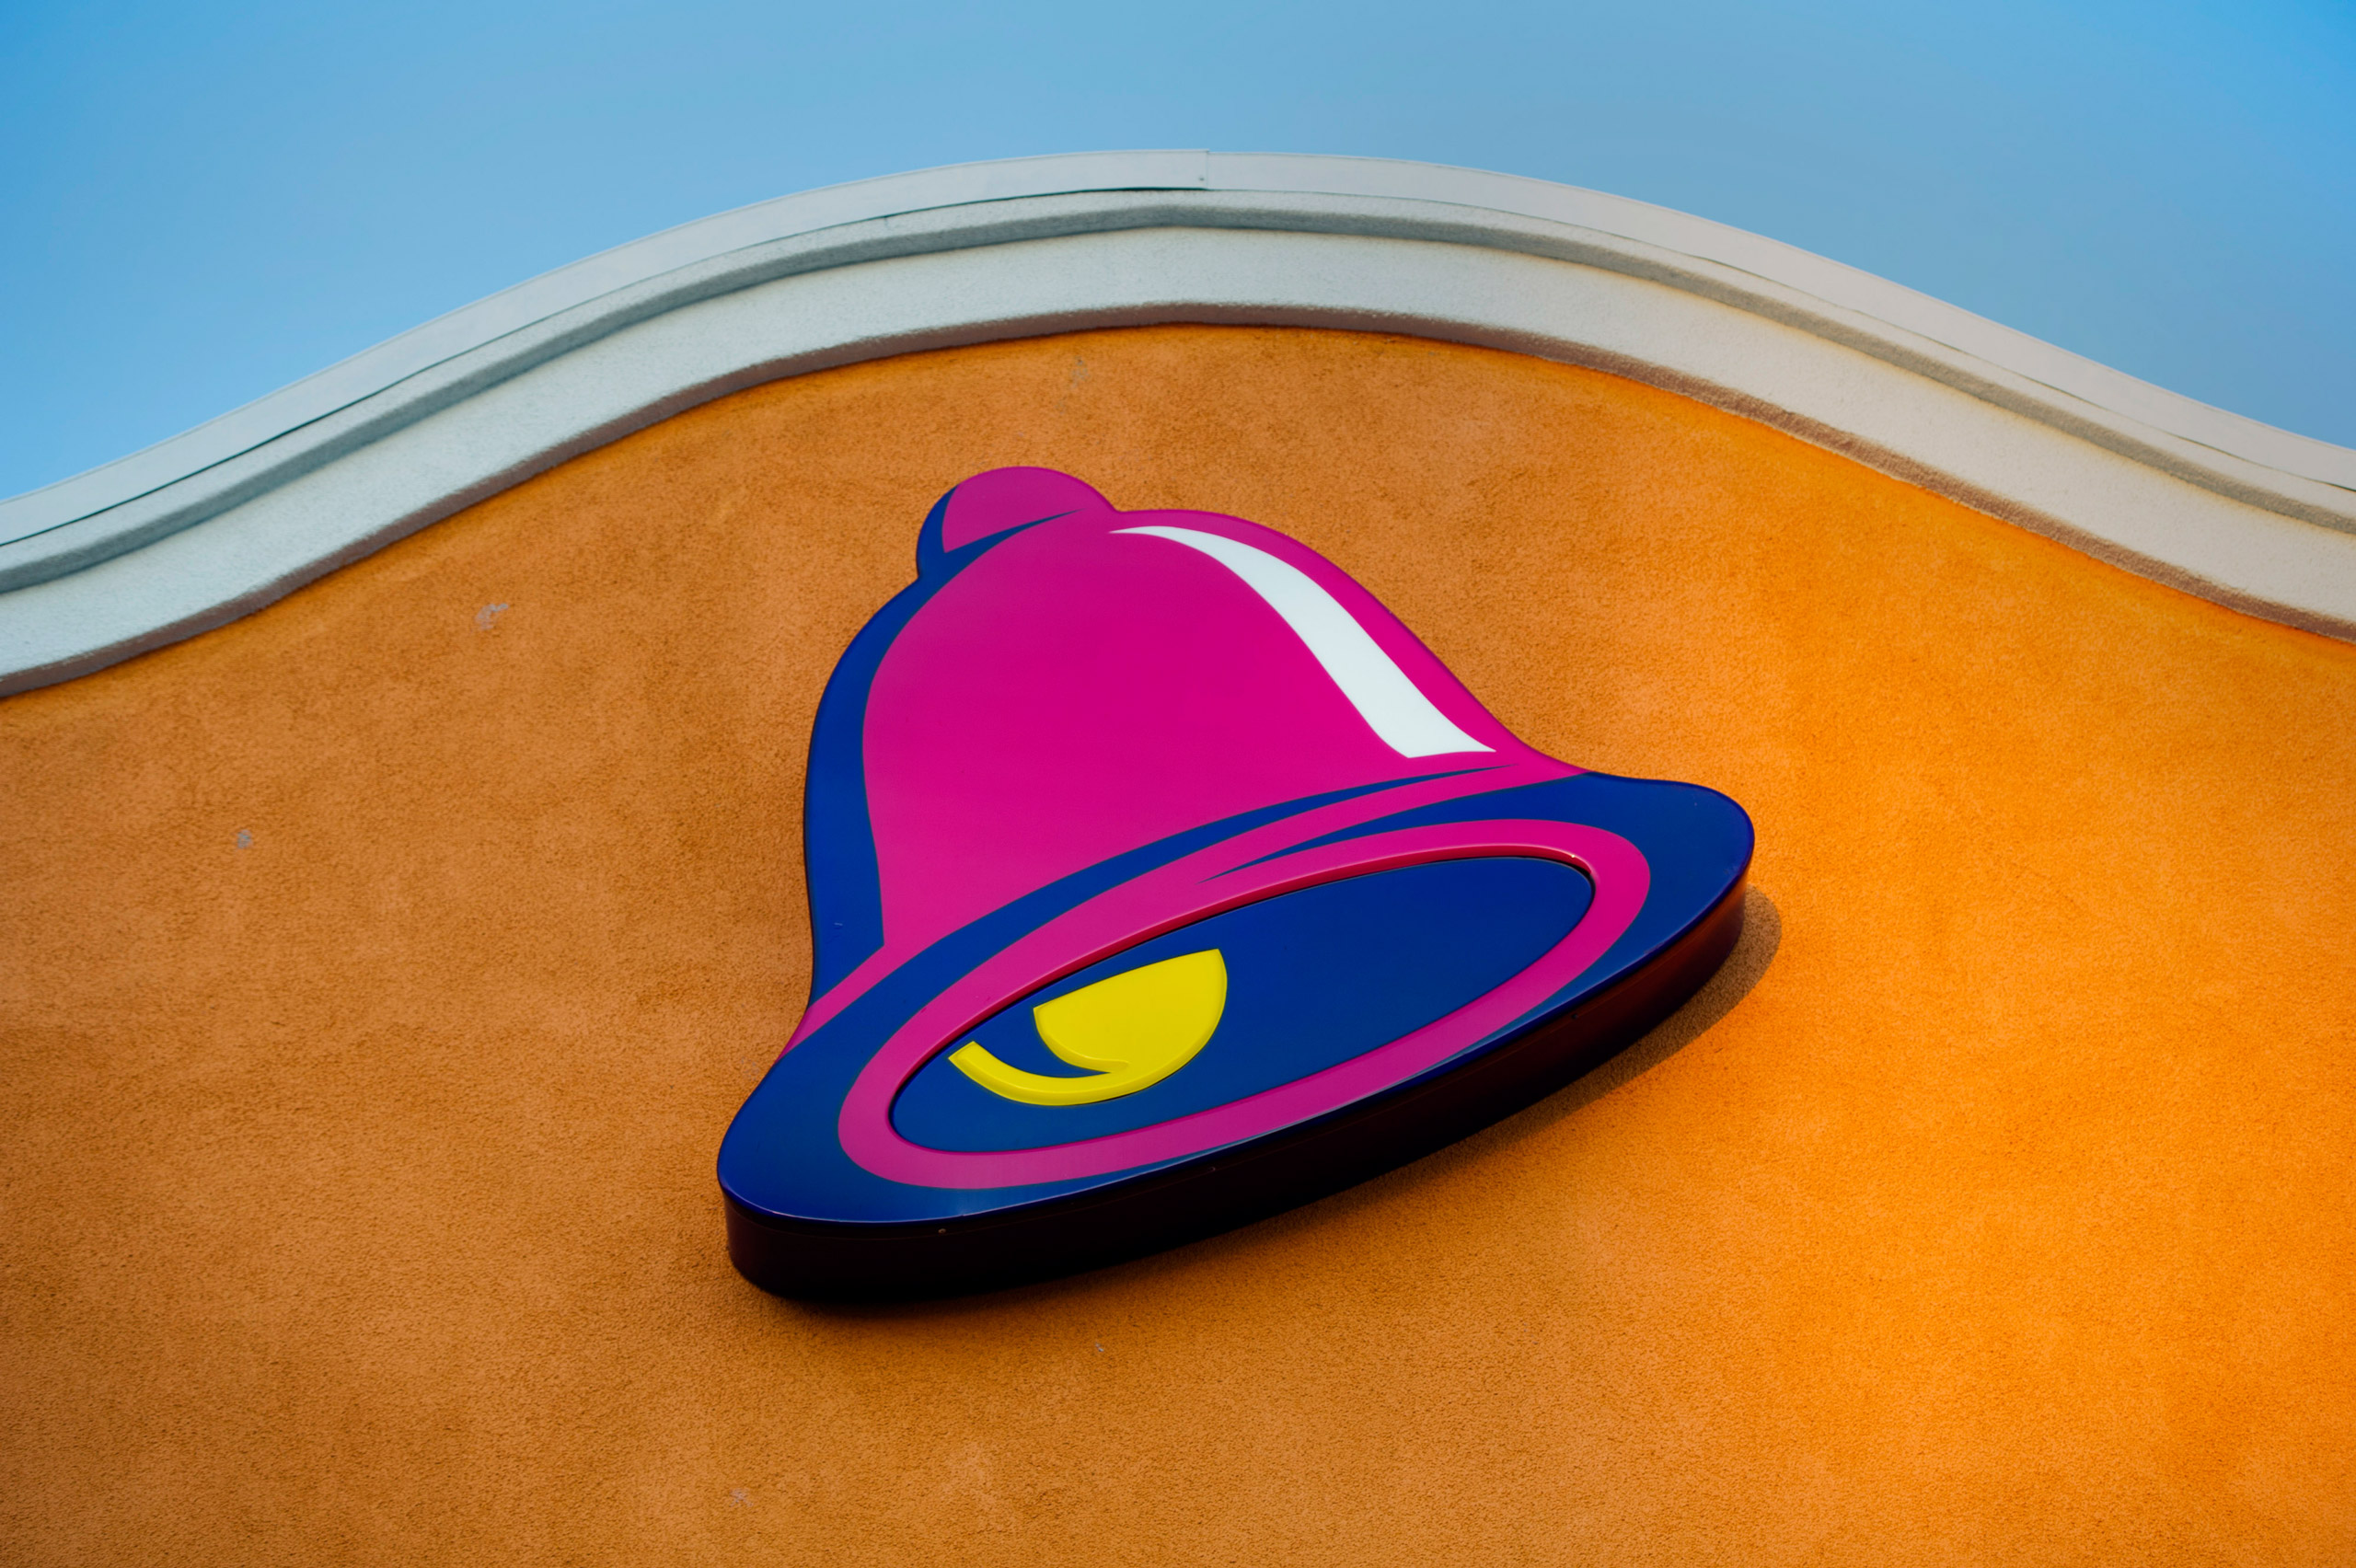 A Taco Bell in Daly City, Calif., on Apr. 18, 2014. (Bloomberg/Getty Images)